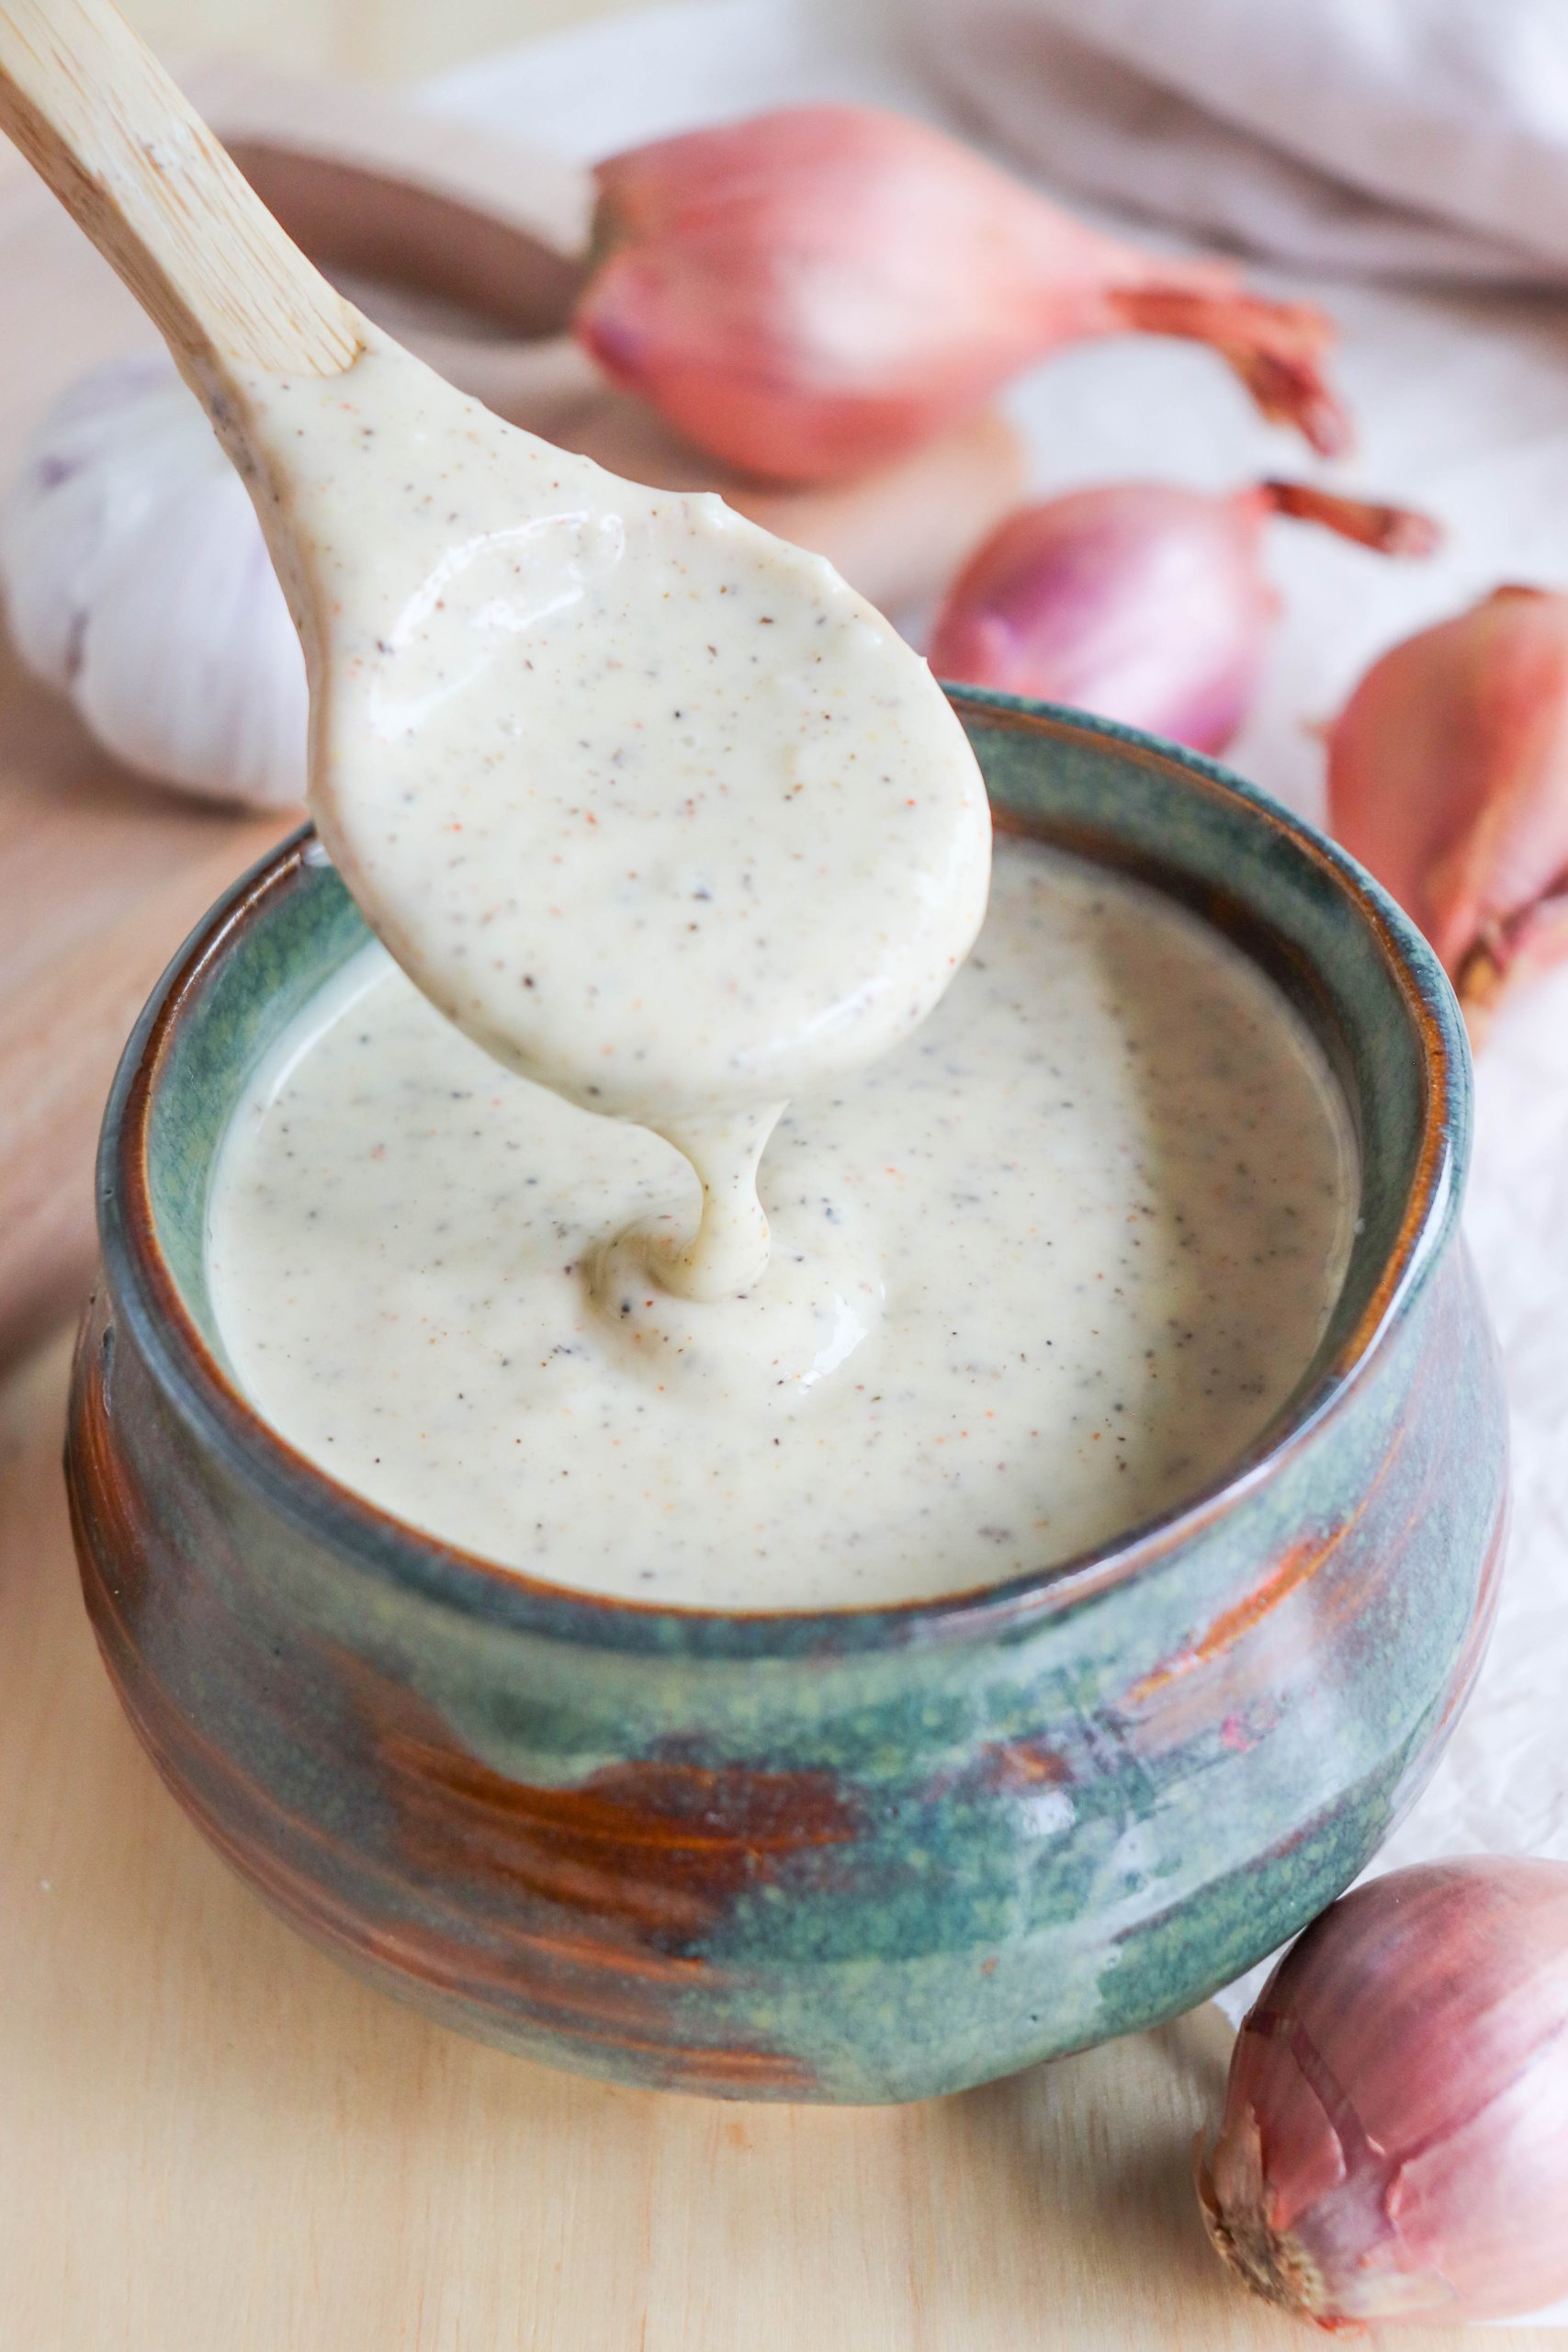 Alabama White Sauce Recipe in a blue dish with a wooden spoon.